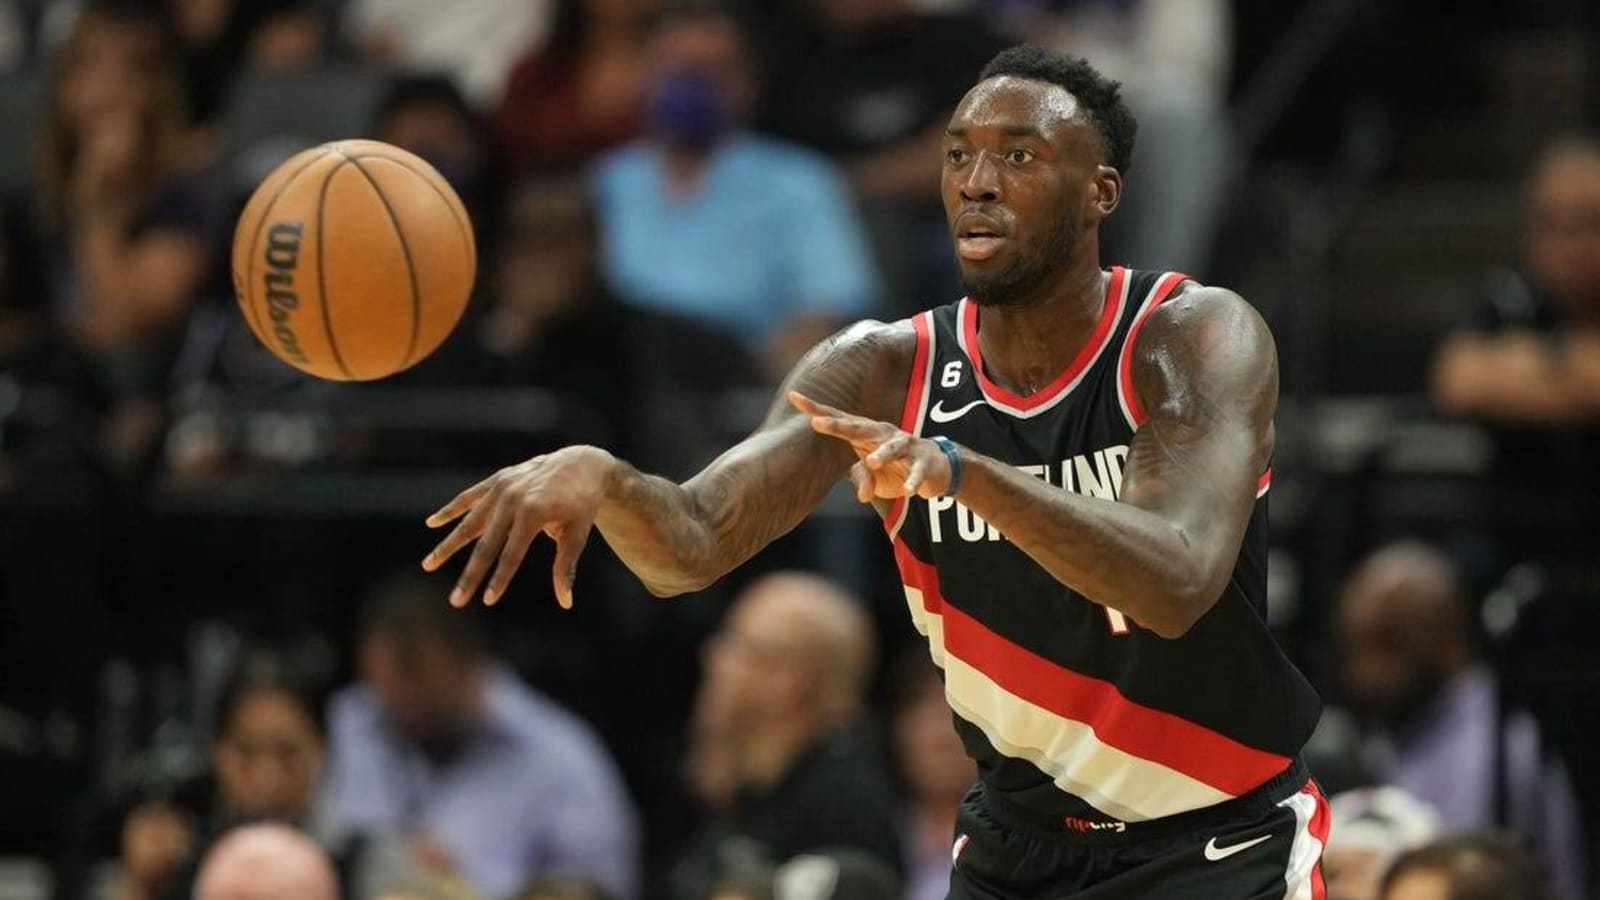 Report: Blazers F Nassir Little gets 4-year, $28M extension